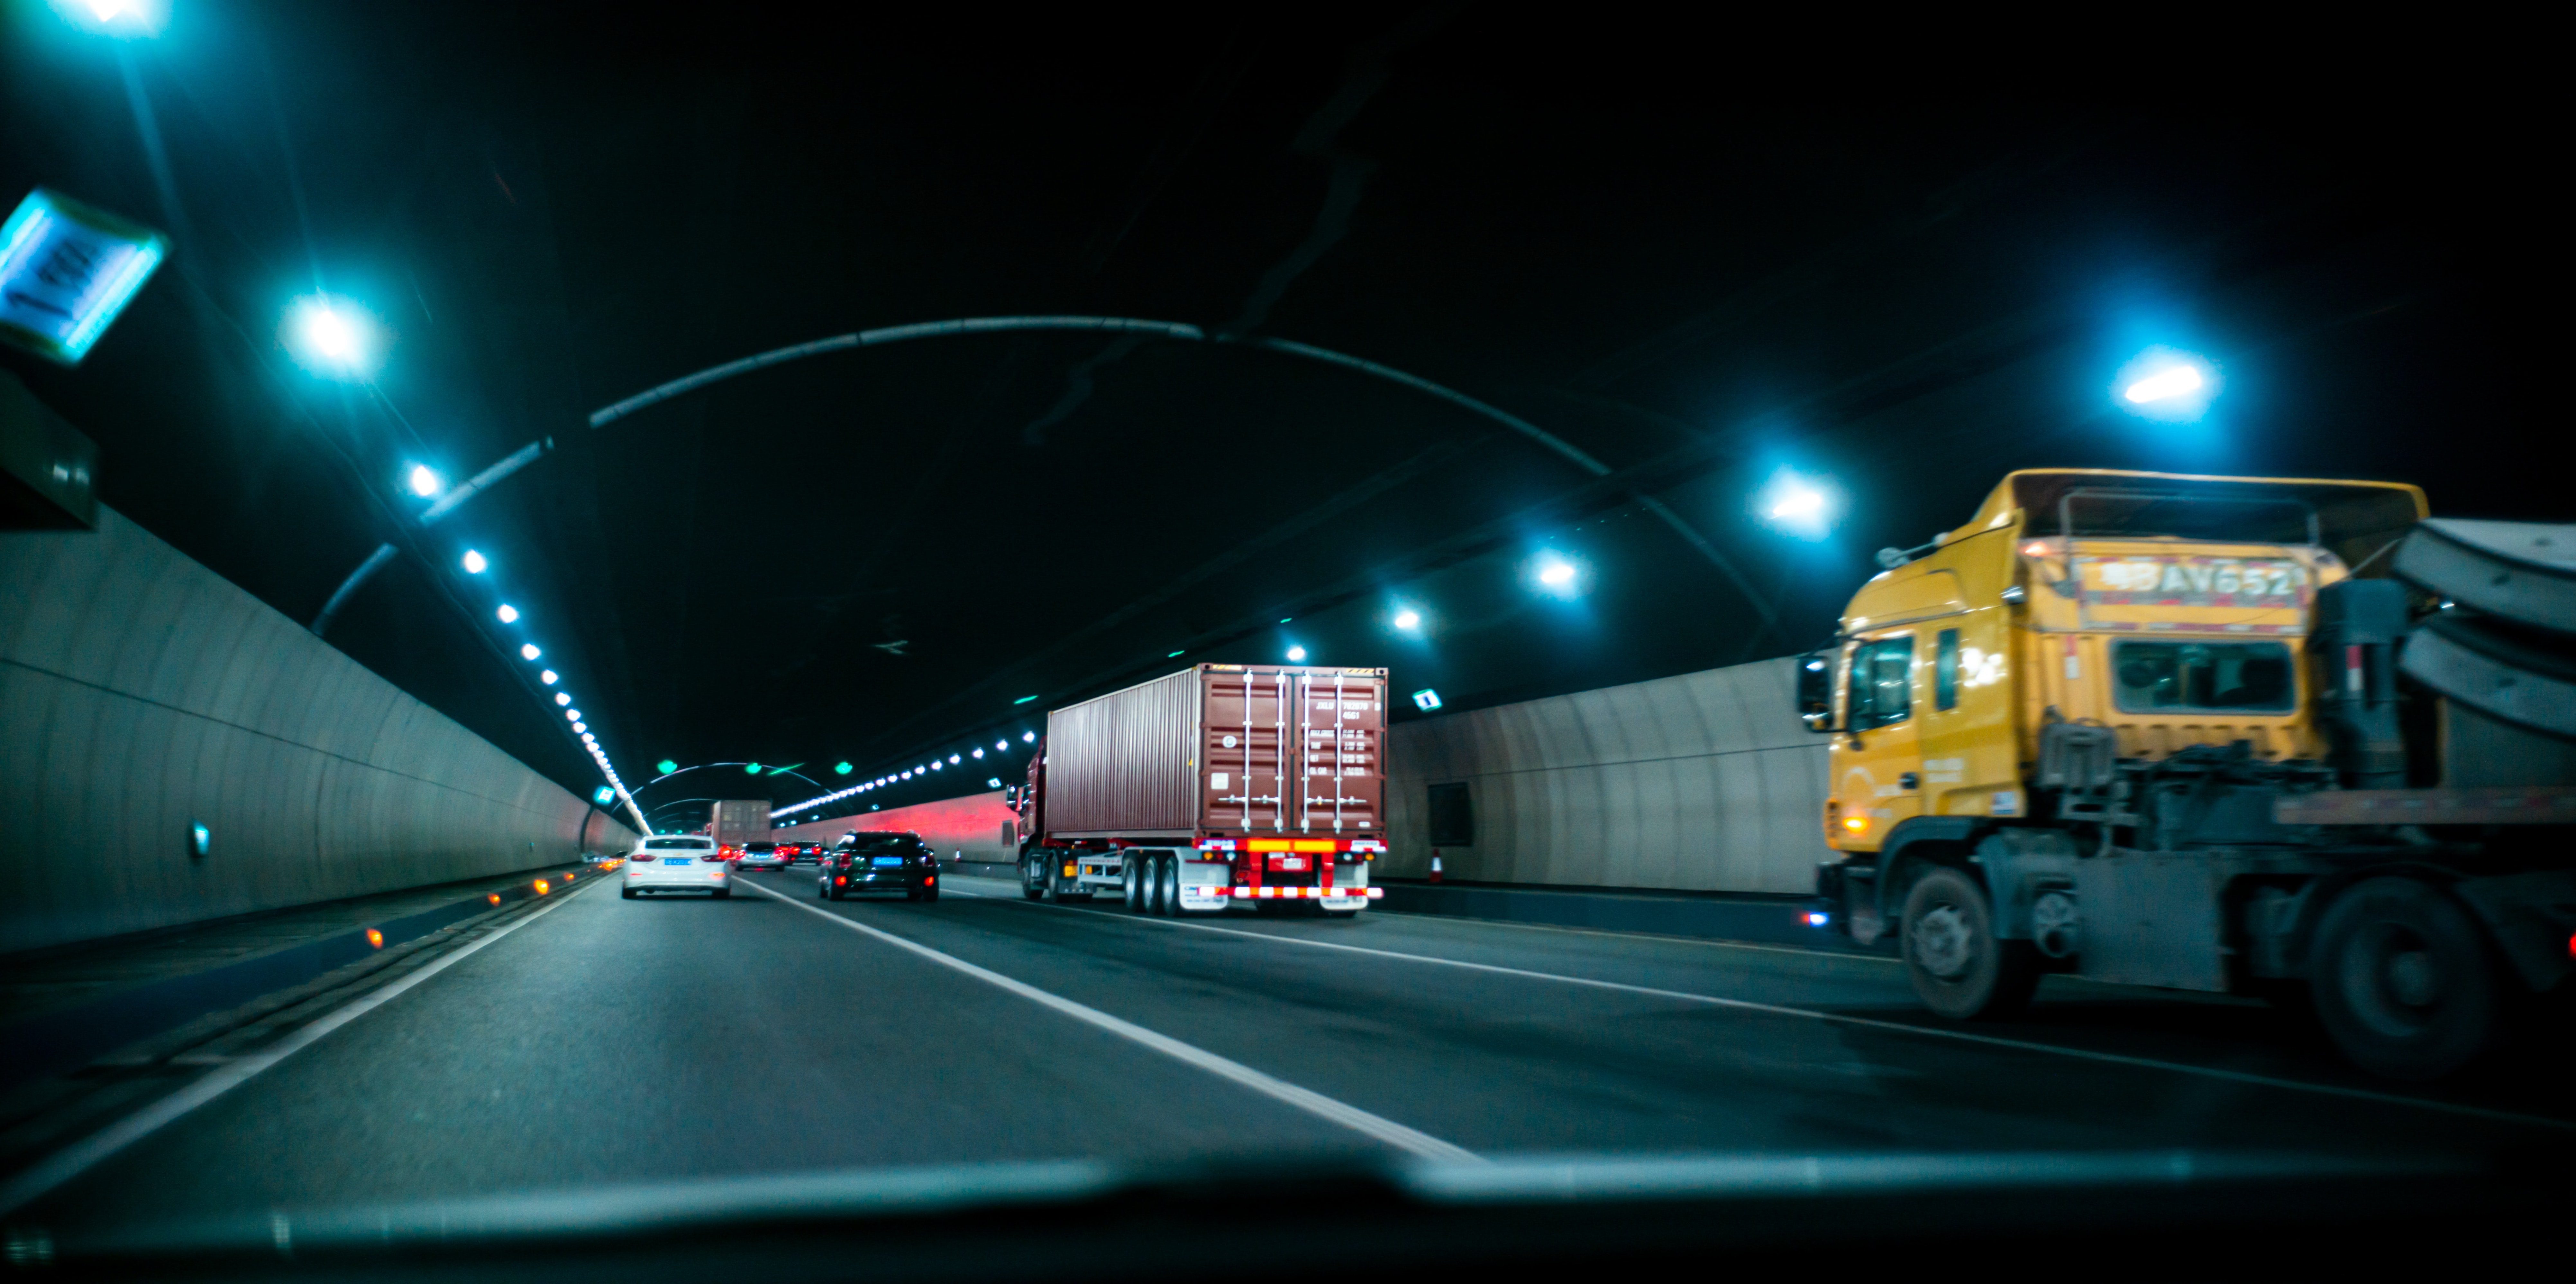 If you were involved in a truck accident, find a qualified truck accident attorney